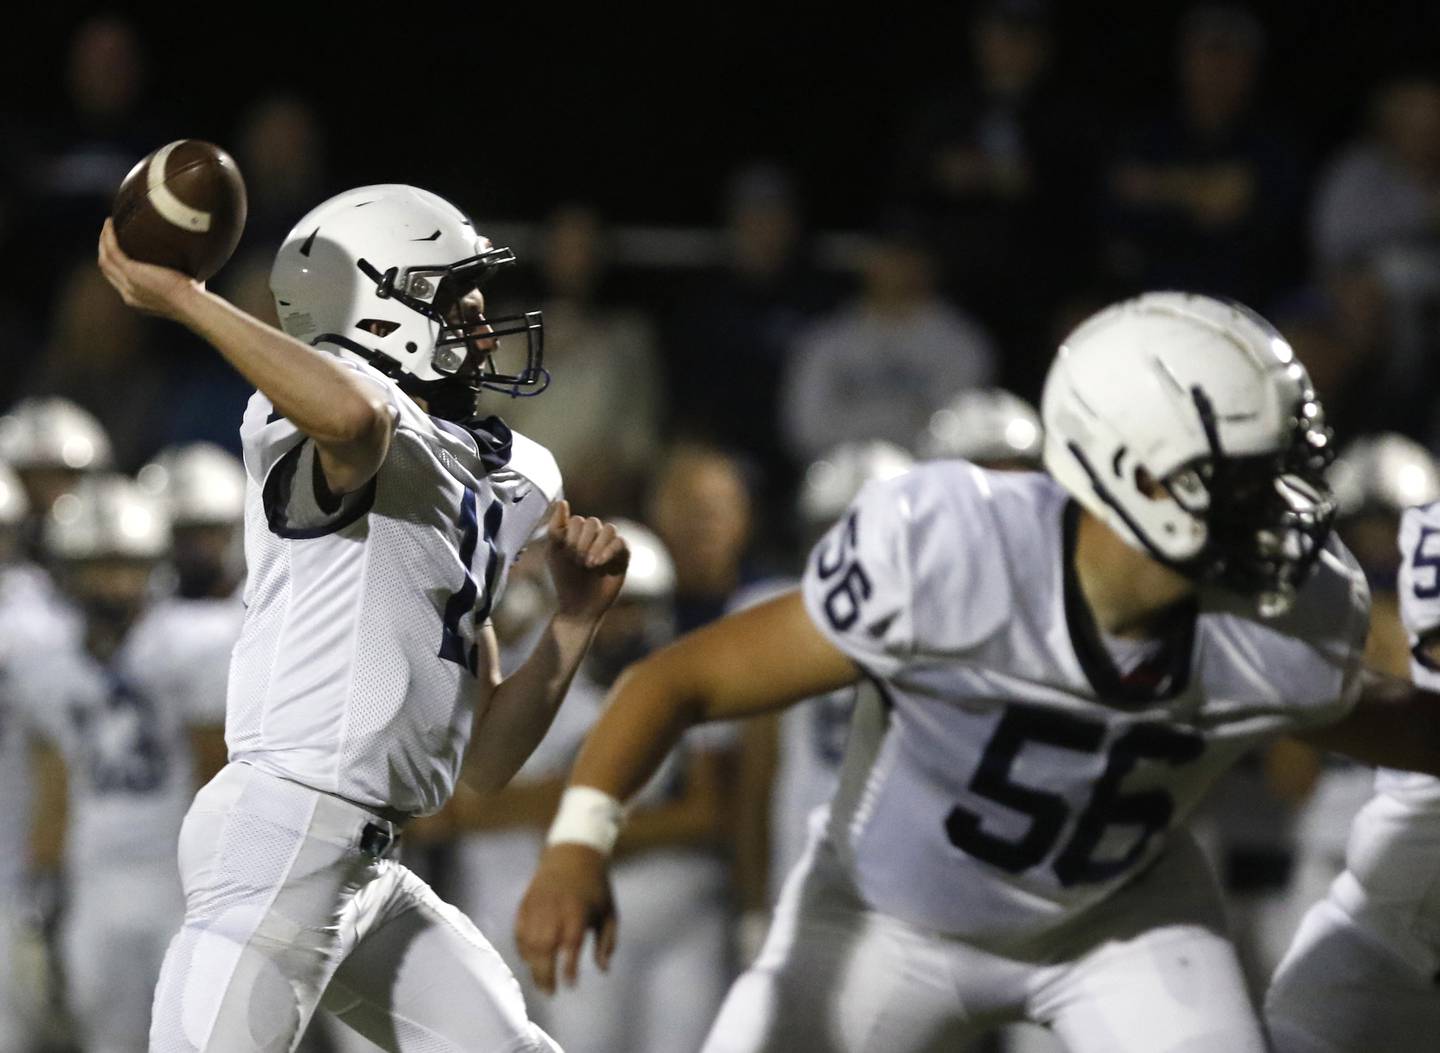 Cary-Grove's Payton Seaburg throws a touchdown pass during a Fox Valley Conference football game between Prairie Ridge  and Cary-Grove Friday, Sept. 23, 2022, at Prairie Ridge High School in Crystal Lake.